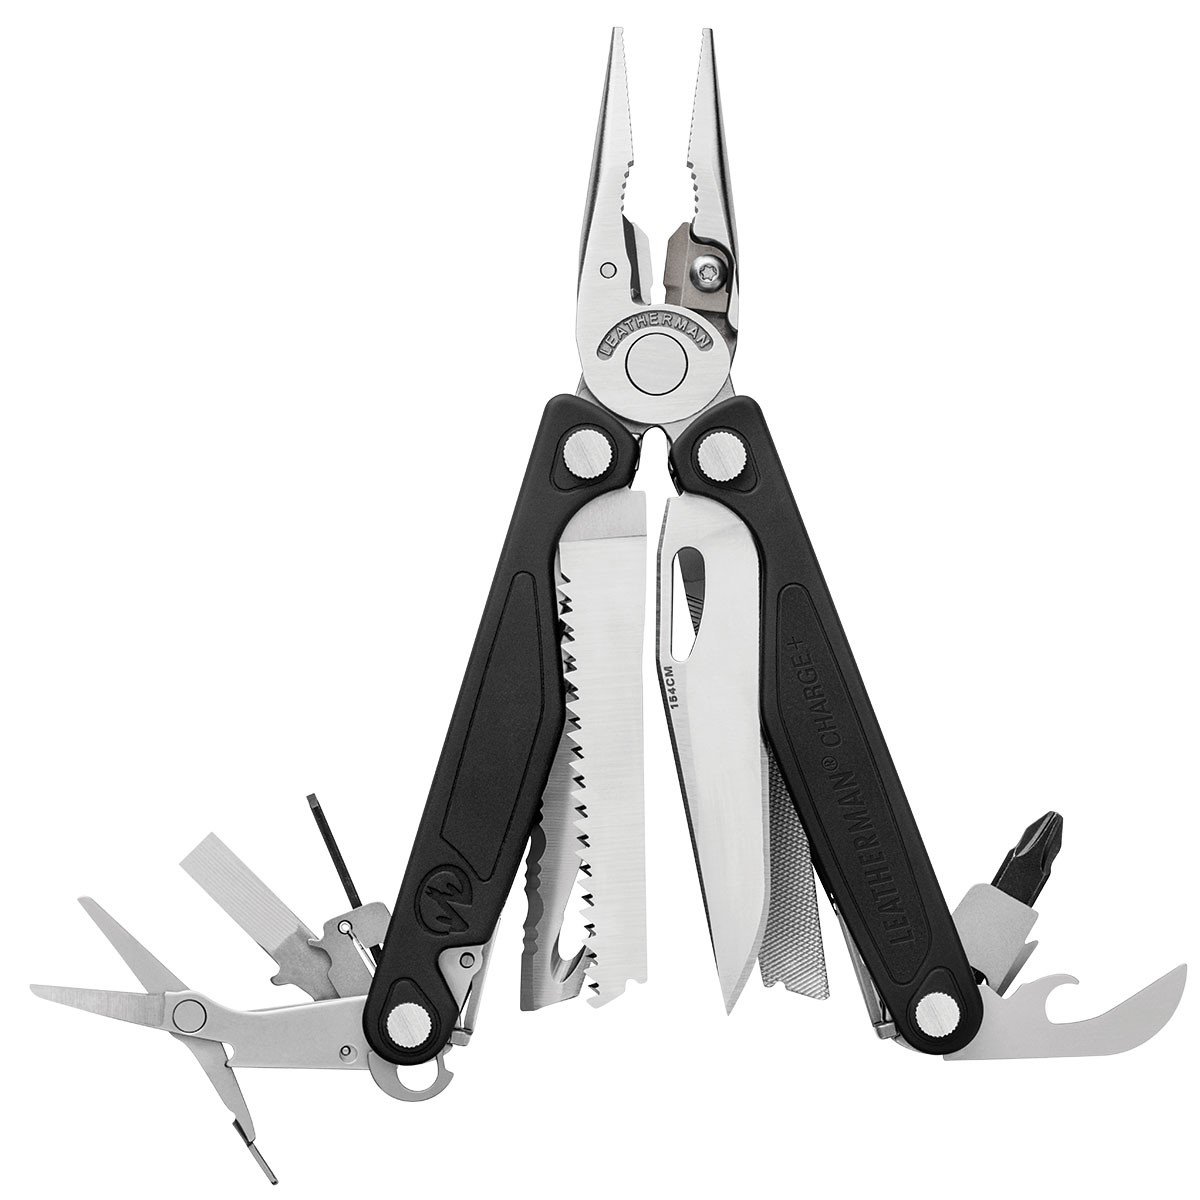 Leatherman Charge Plus Clam Multitool w Wire Stripper